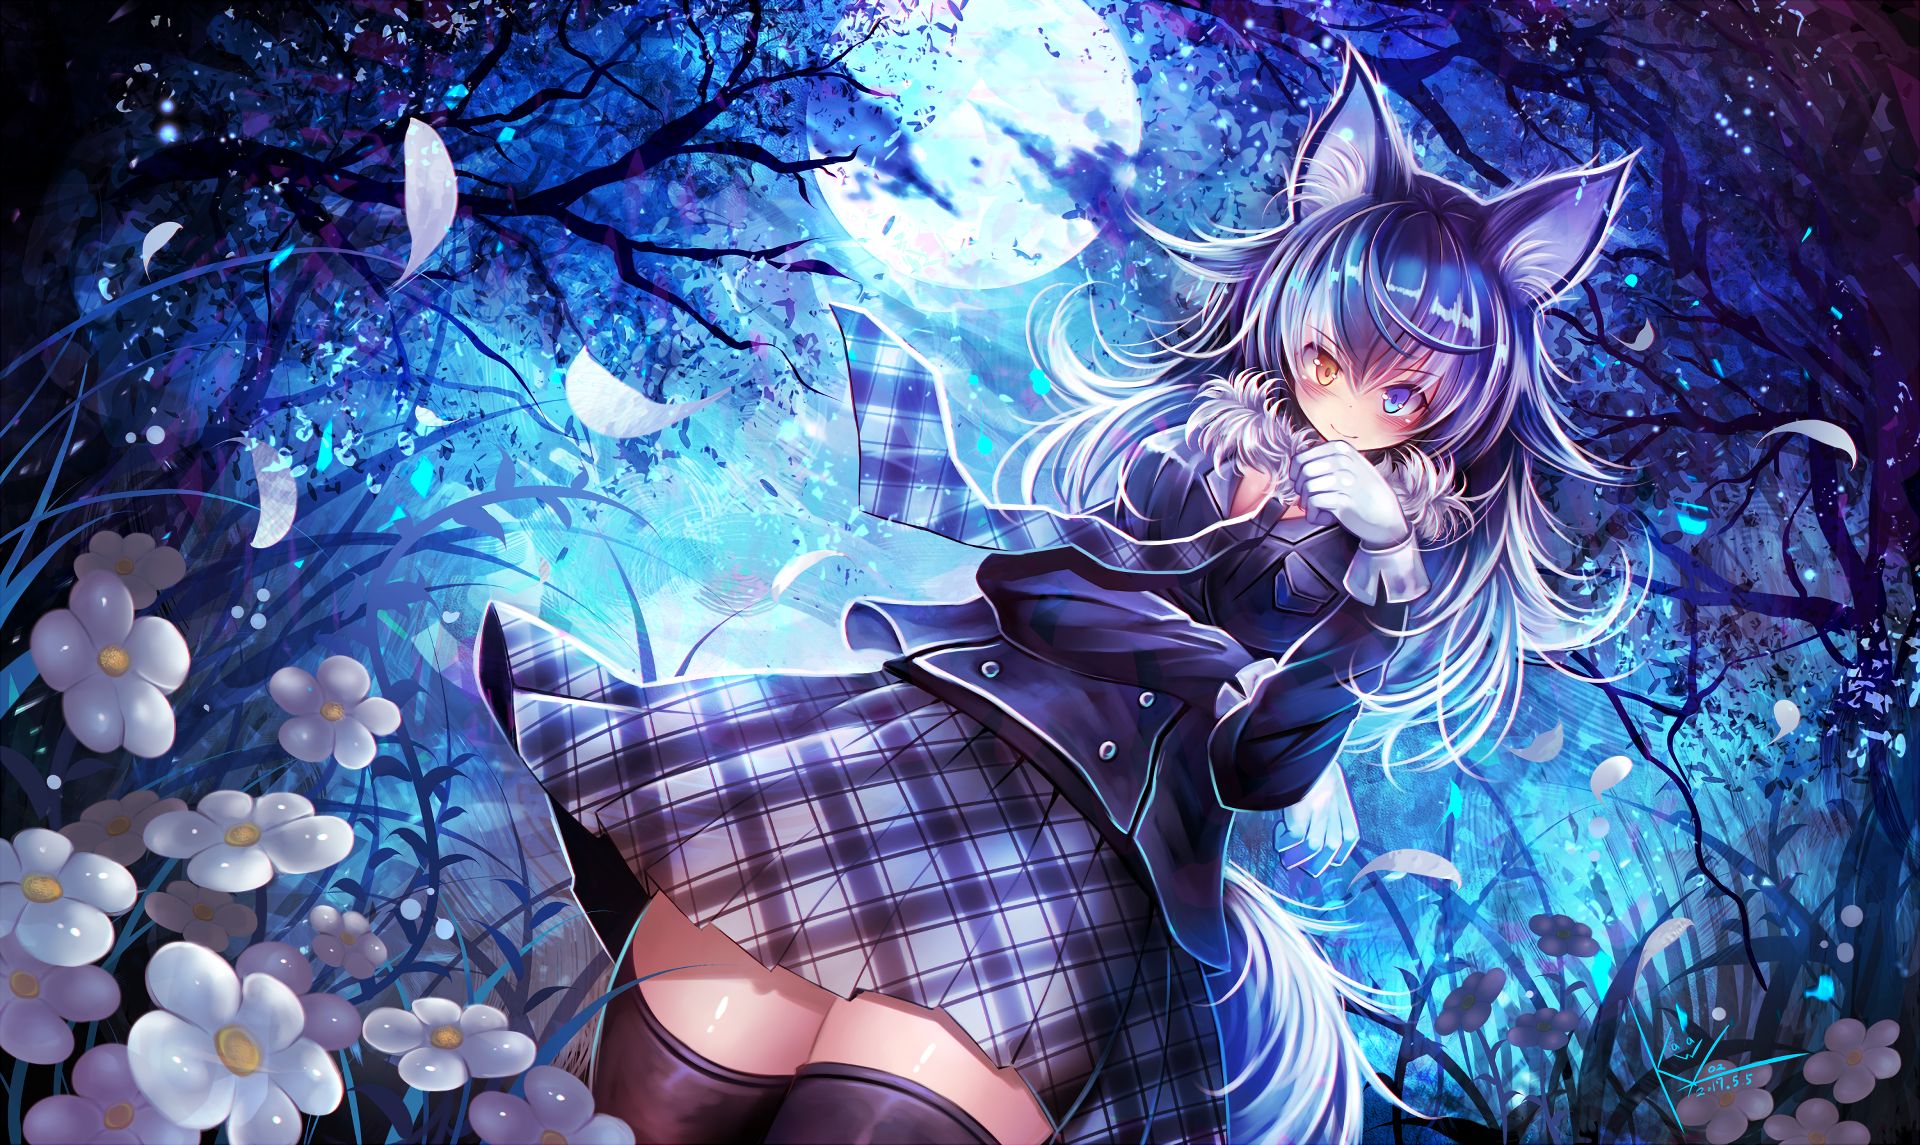 Download Hataage! Kemono Michi wallpapers for mobile phone, free